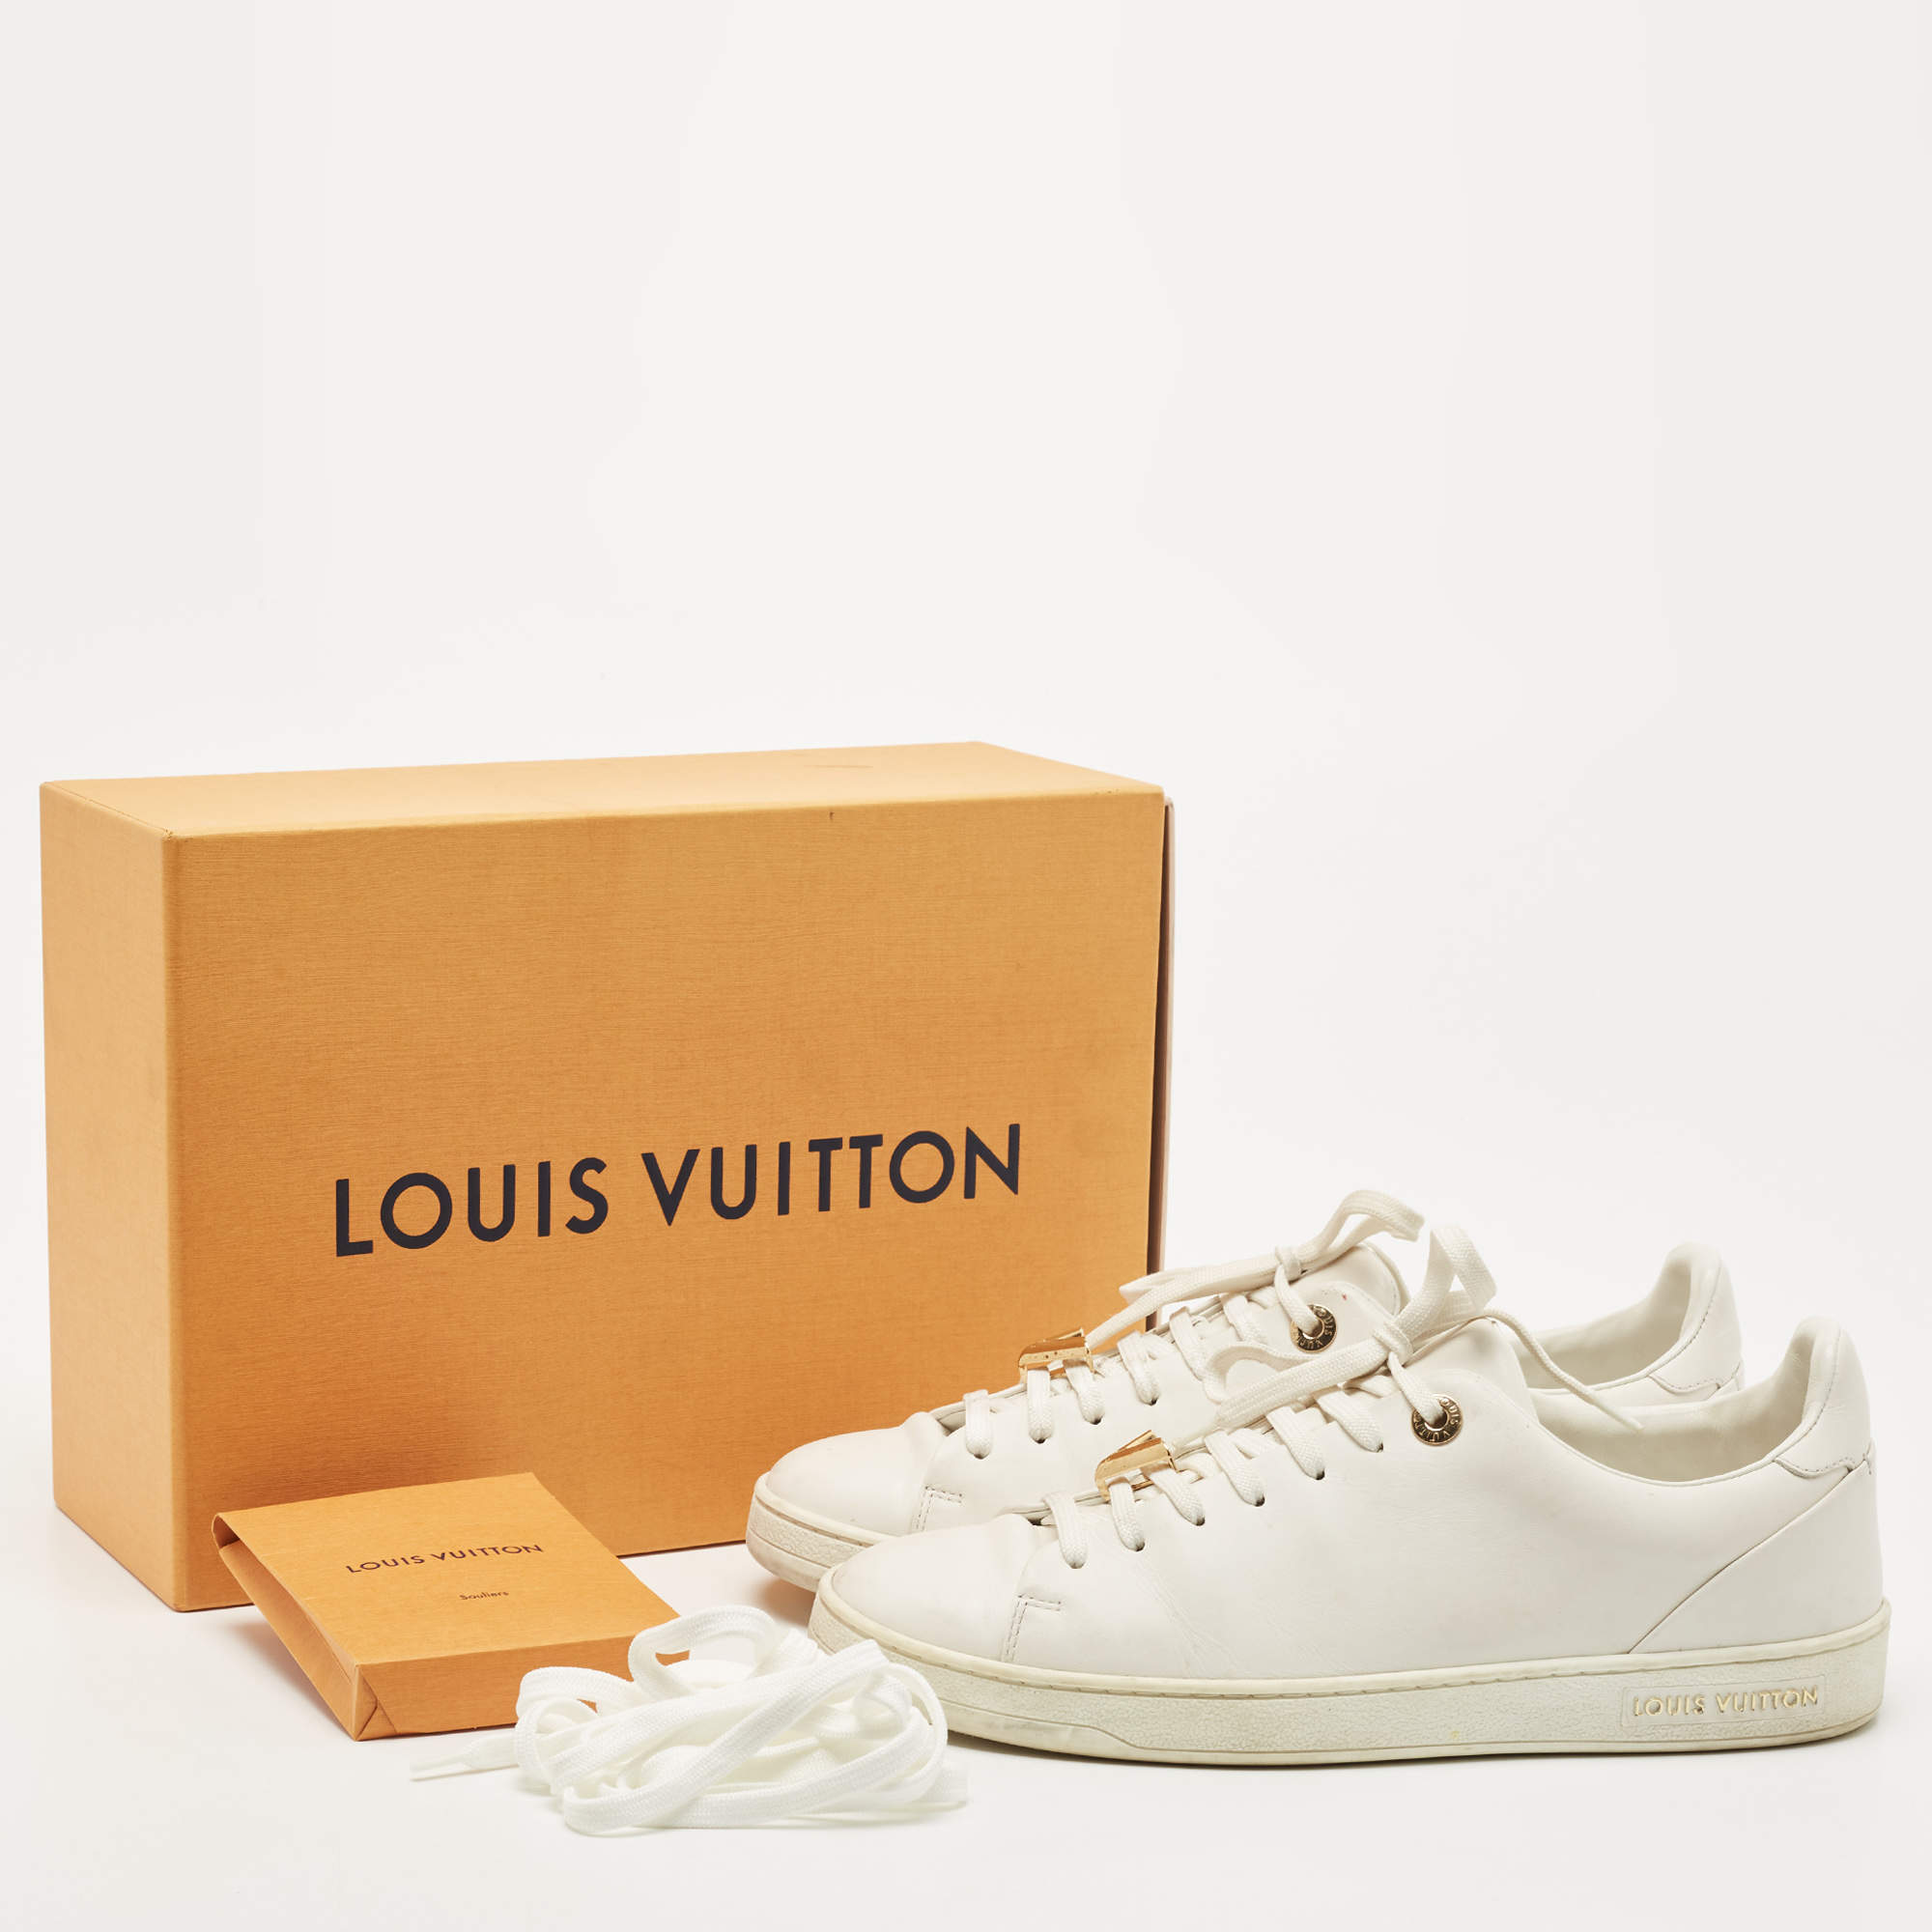 Used - Shoe Box Louis Vuitton Box Shoes - Cardboard - Used